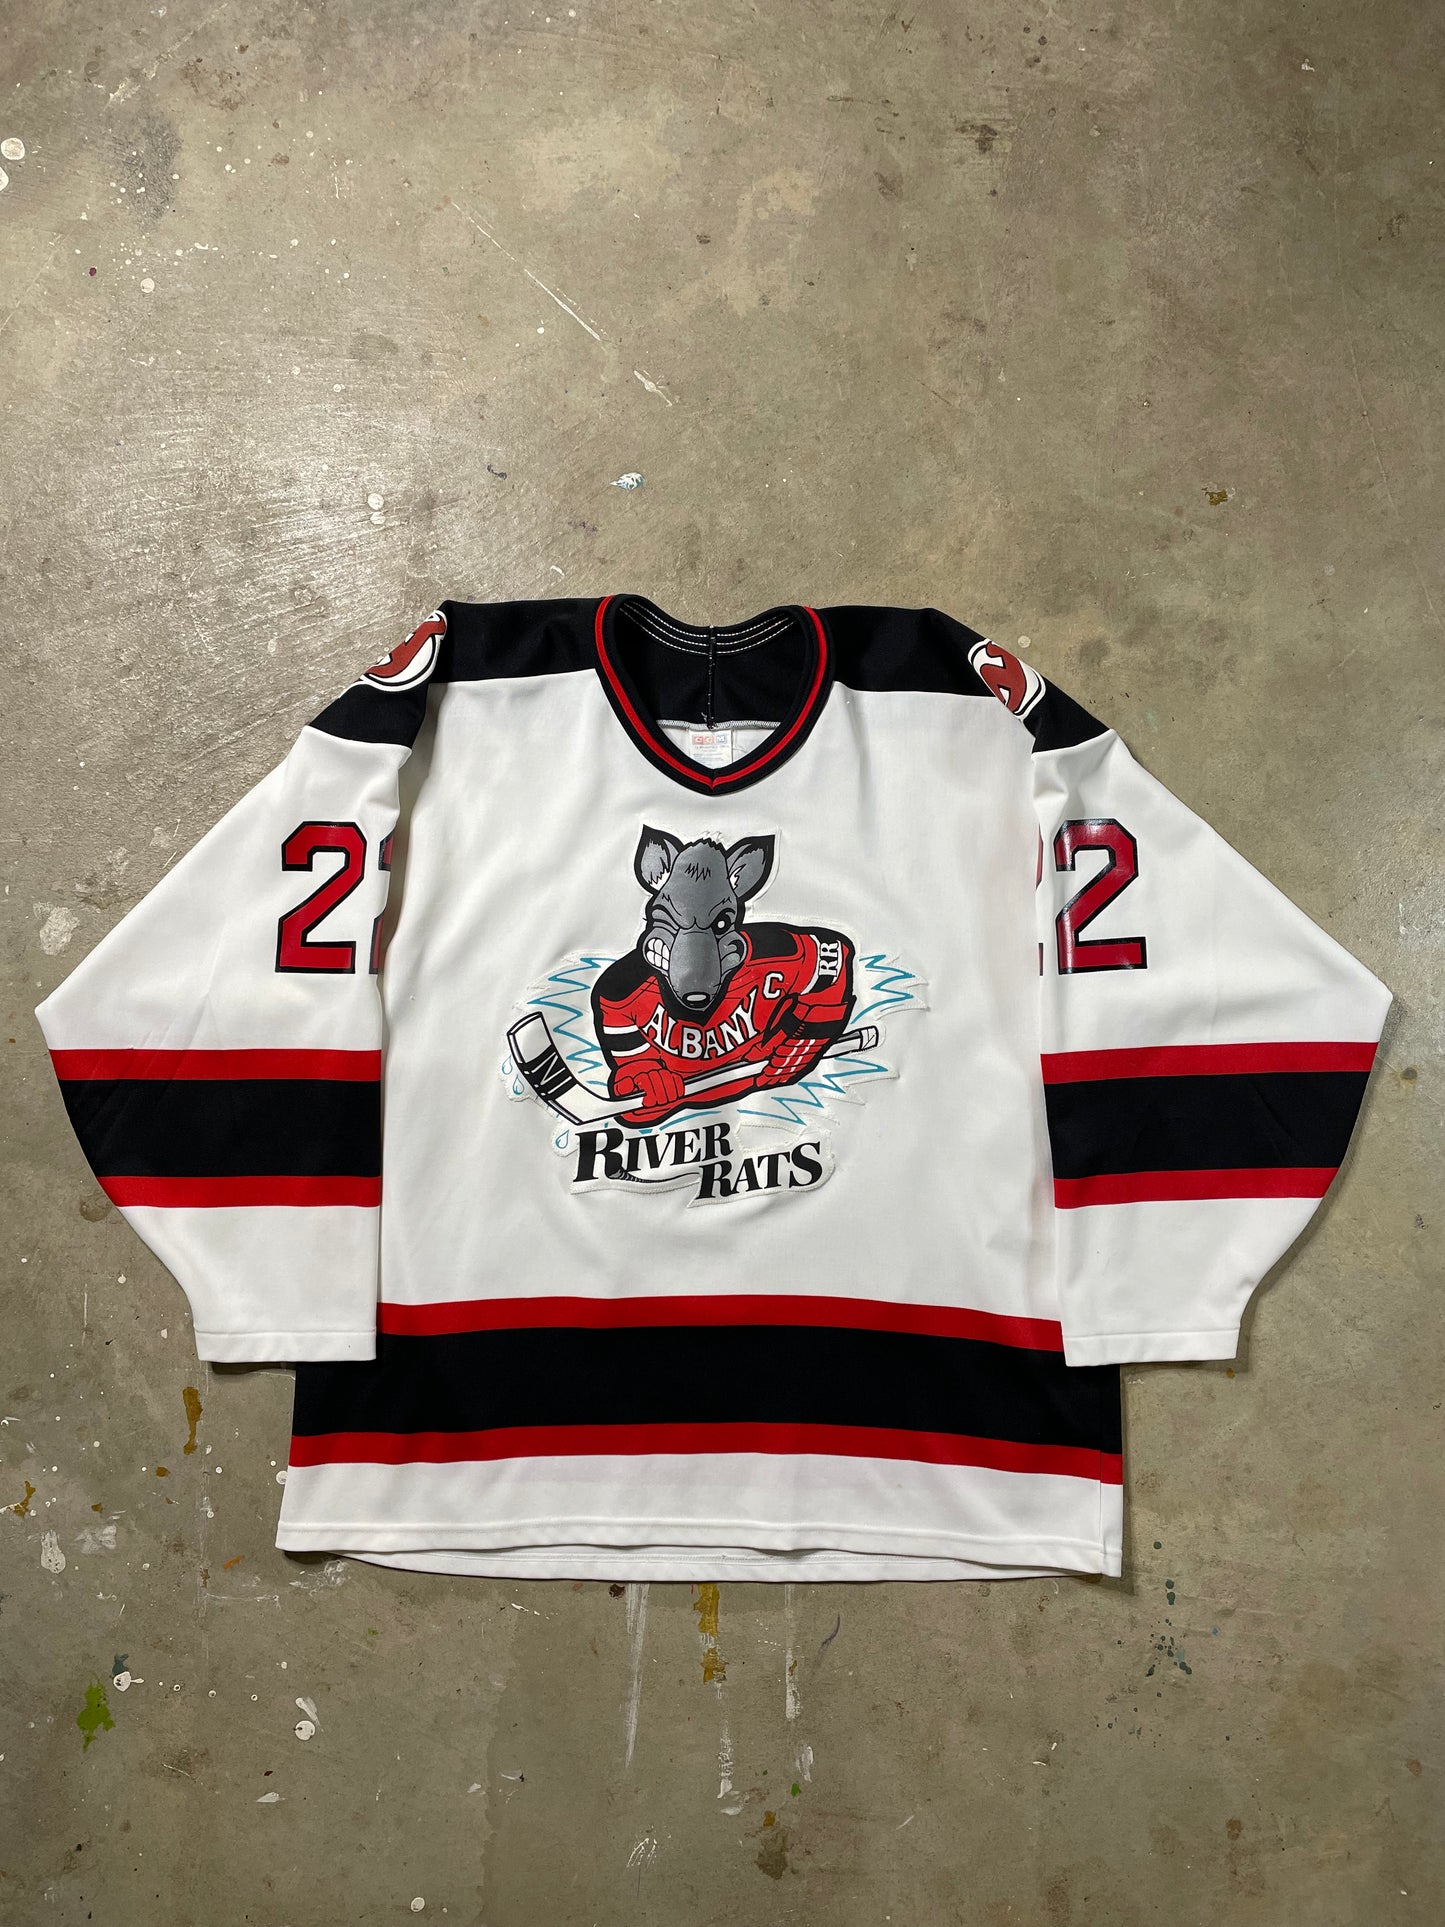 1990s Albany River Rats Jersey